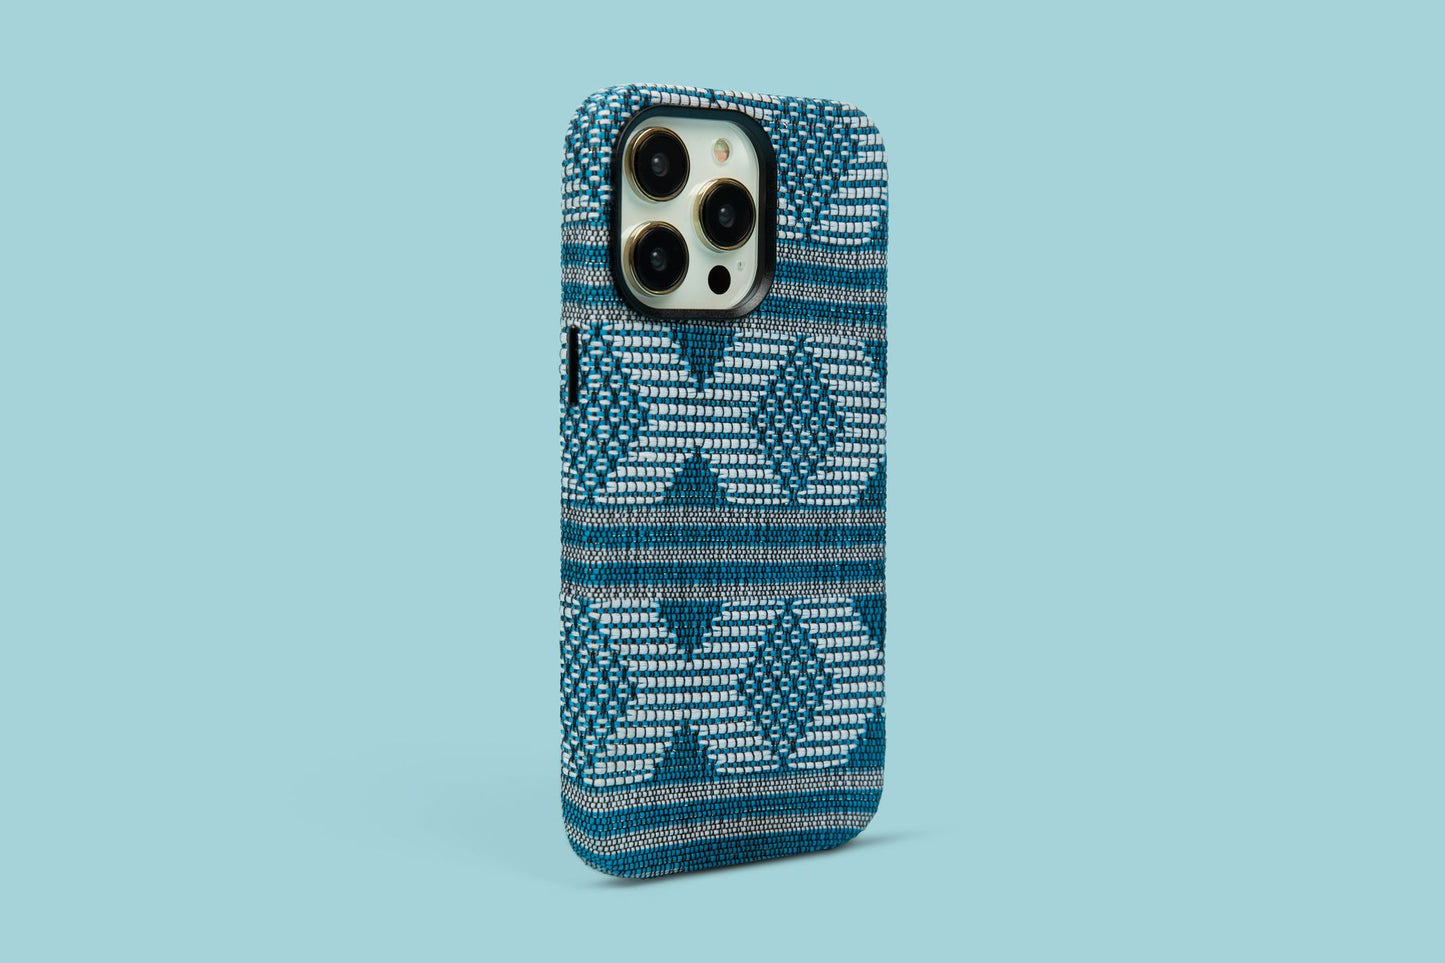 Bold patterned phone case in bold blue and white hues against a serene blue background, a statement piece for iPhone 12, 13, and 14 Pro Max